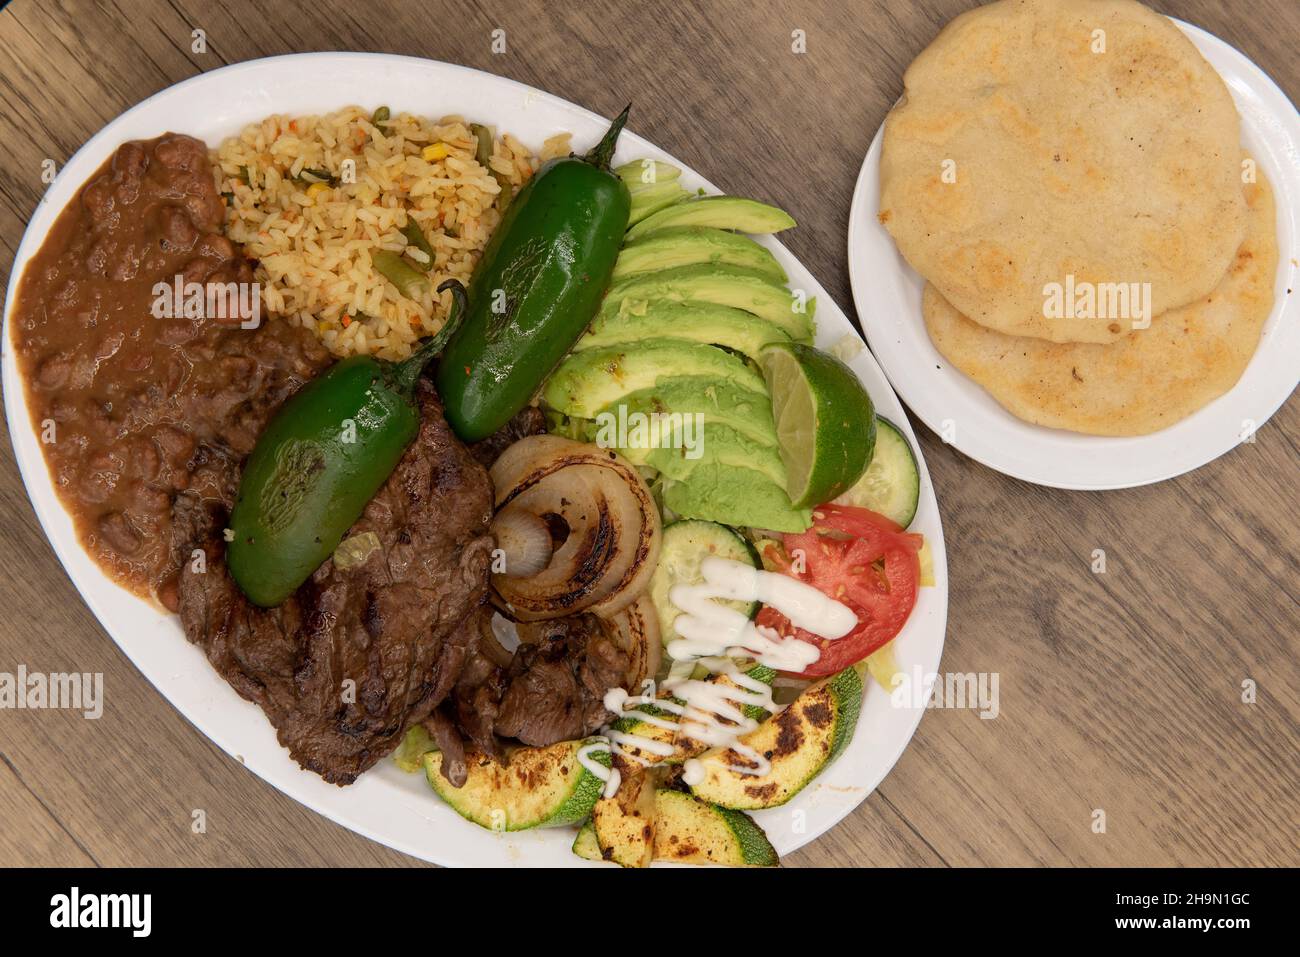 Overhead view of perfectly grilled steak on a plate with Latino rice and sliced avocados and pupusa on the side. Stock Photo